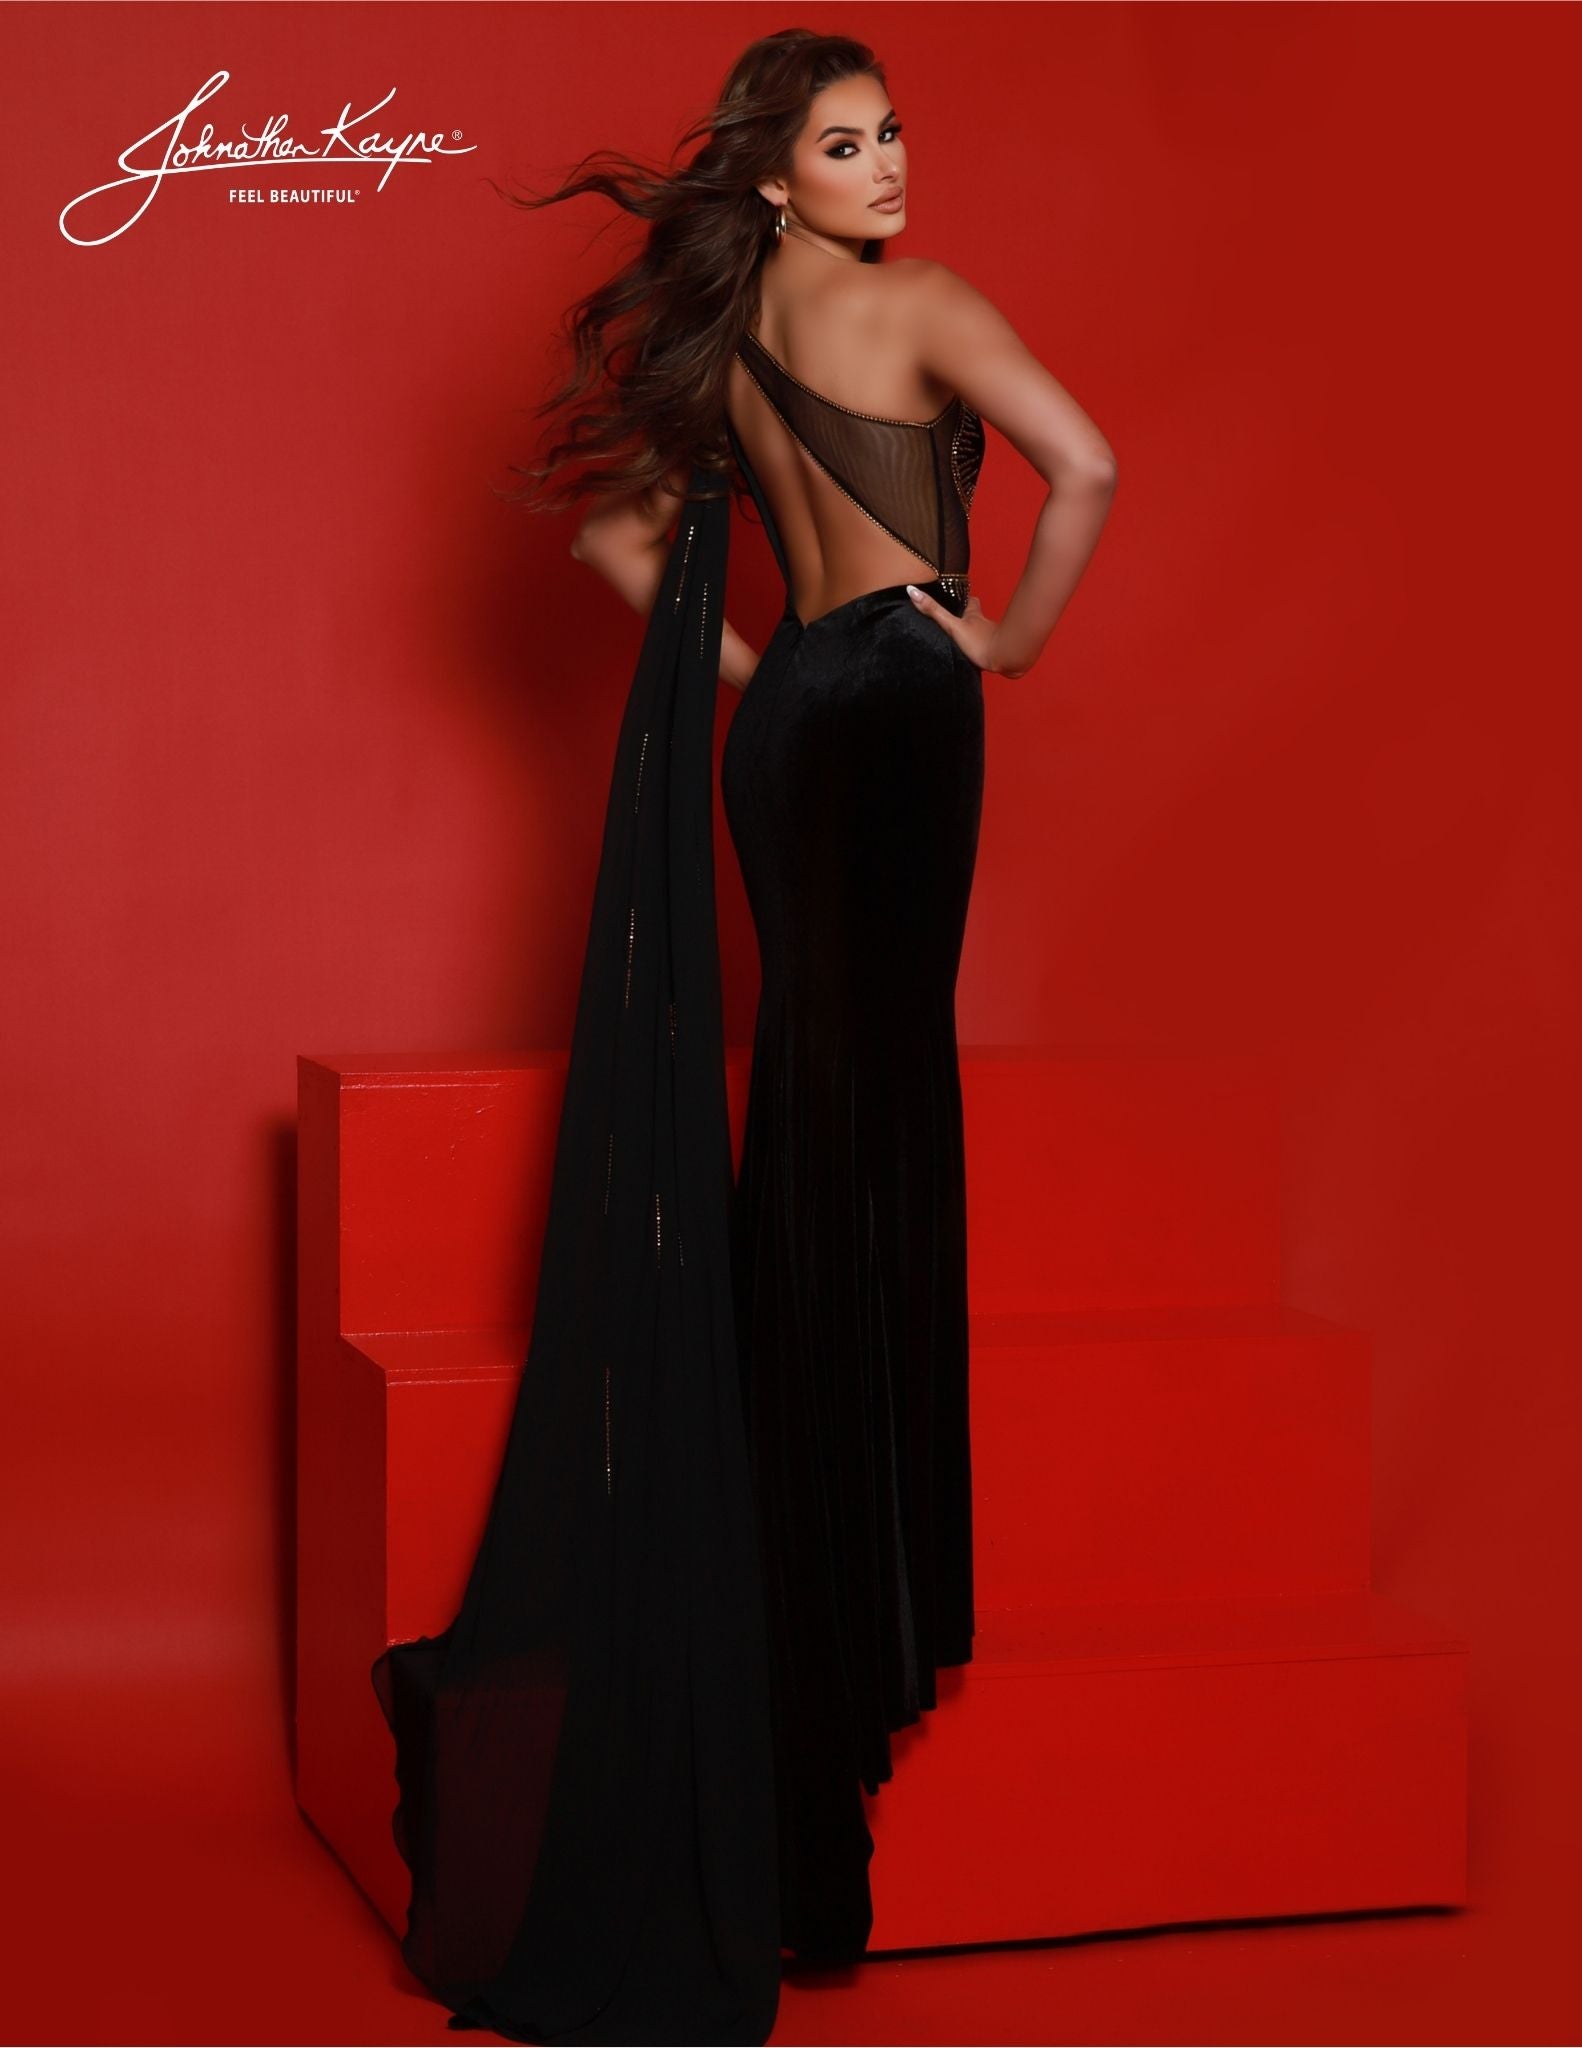 Johnathan Kayne's 2861 Long Prom Dress is a luxurious formal gown perfect for special occasions. Featuring a velvet one-shoulder design with a sheer cutout and detachable shoulder cape, this gown is sure to make an impact with its dramatic slit tail and form-fitting silhouette. Make a statement in this elegant velvet piece. Embrace your inner goddess in our one shoulder stretch velvet gown. 